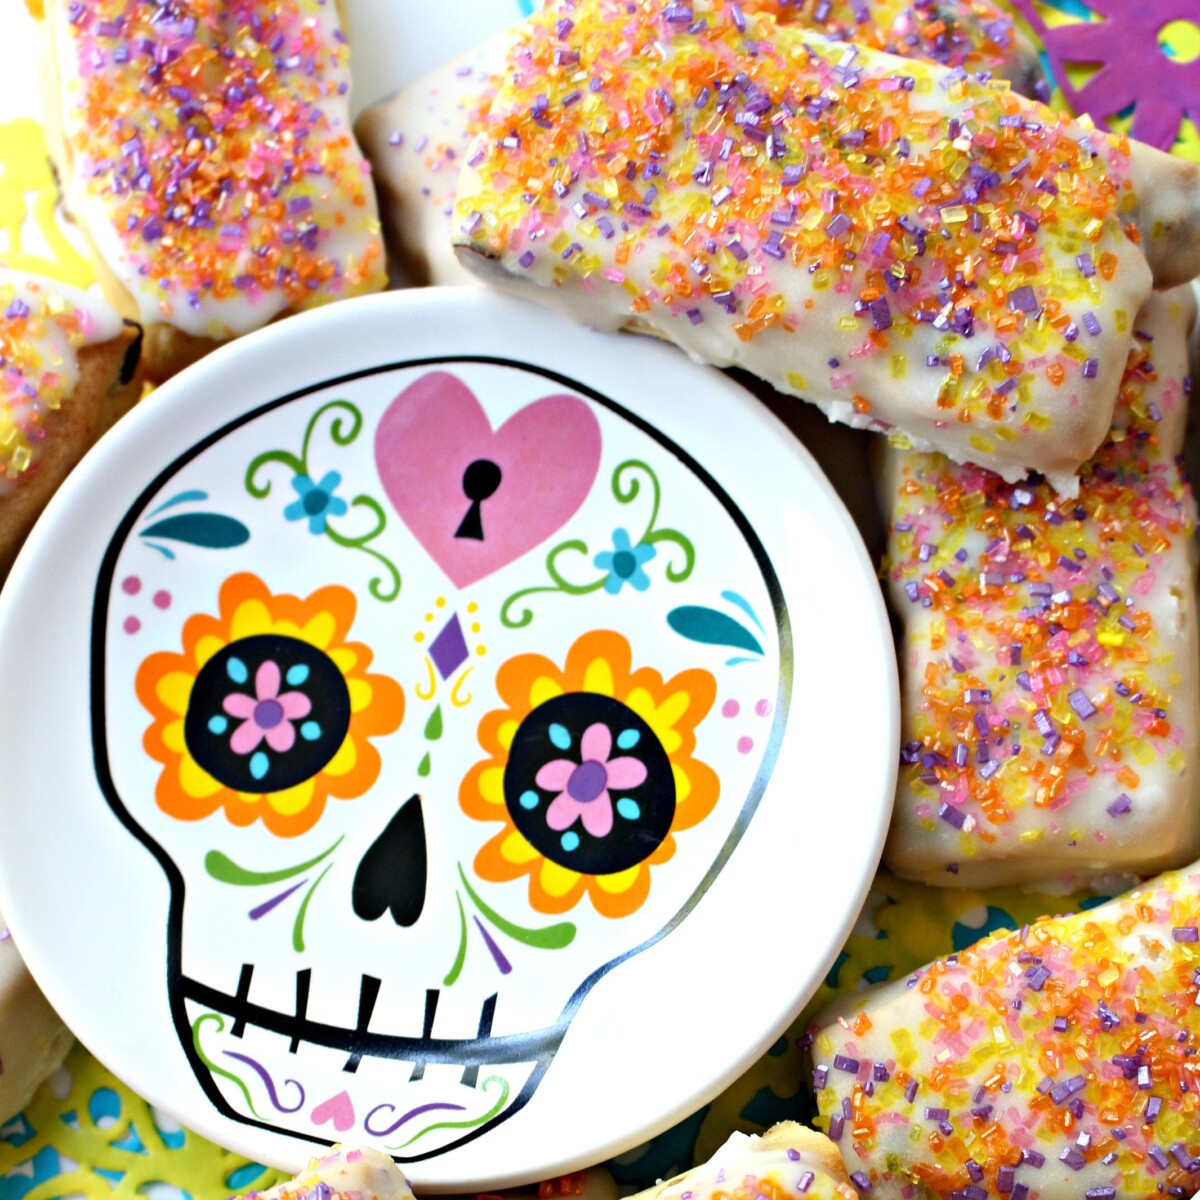 Pabassinas cookies with a calavera skull plate.